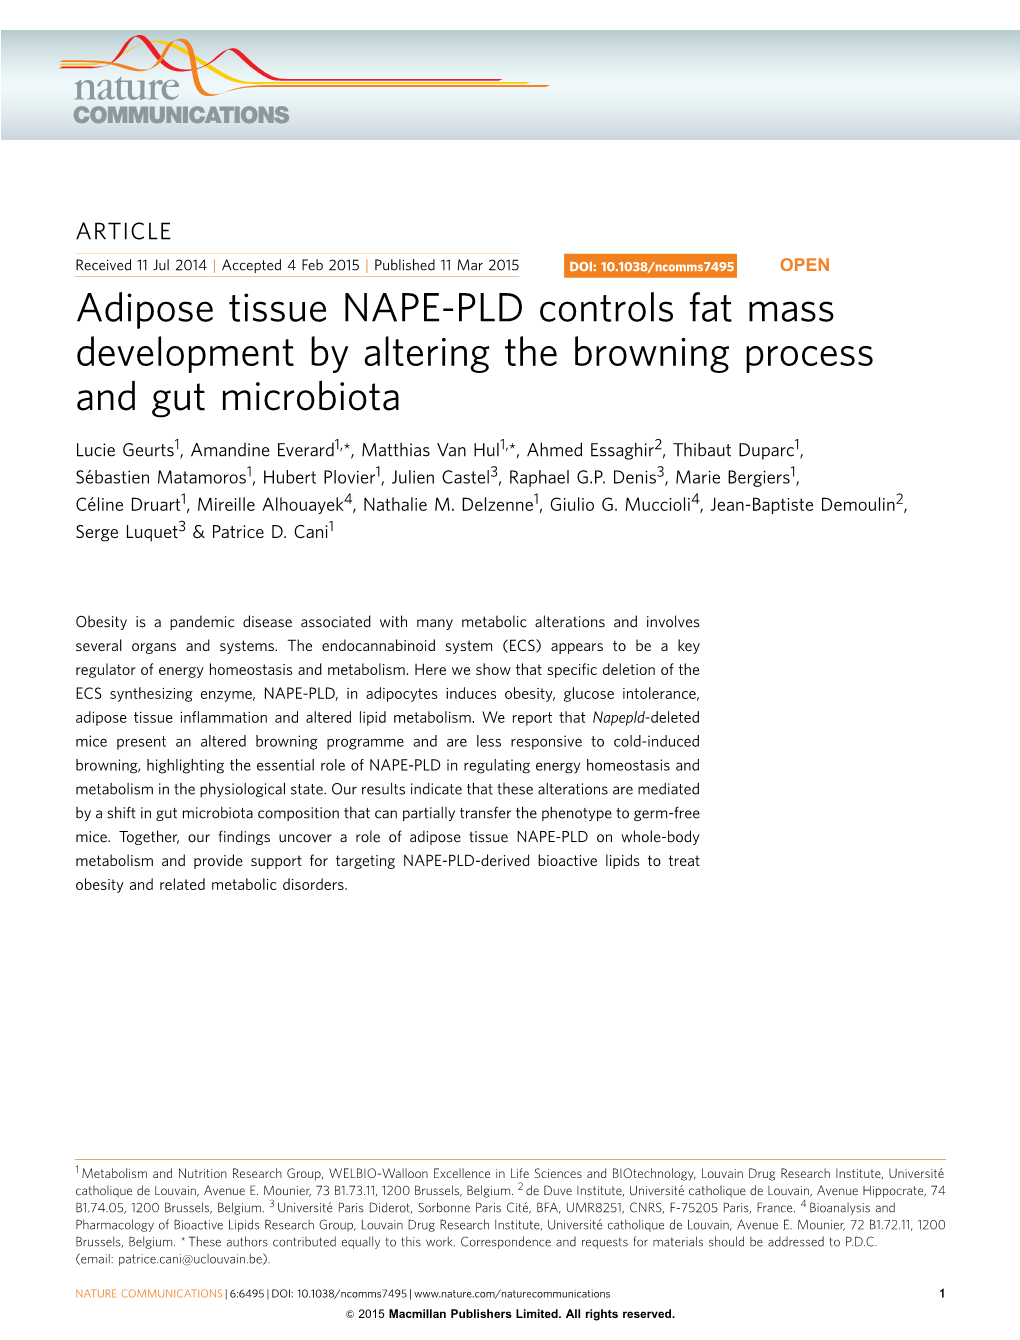 Adipose Tissue NAPE-PLD Controls Fat Mass Development by Altering the Browning Process and Gut Microbiota